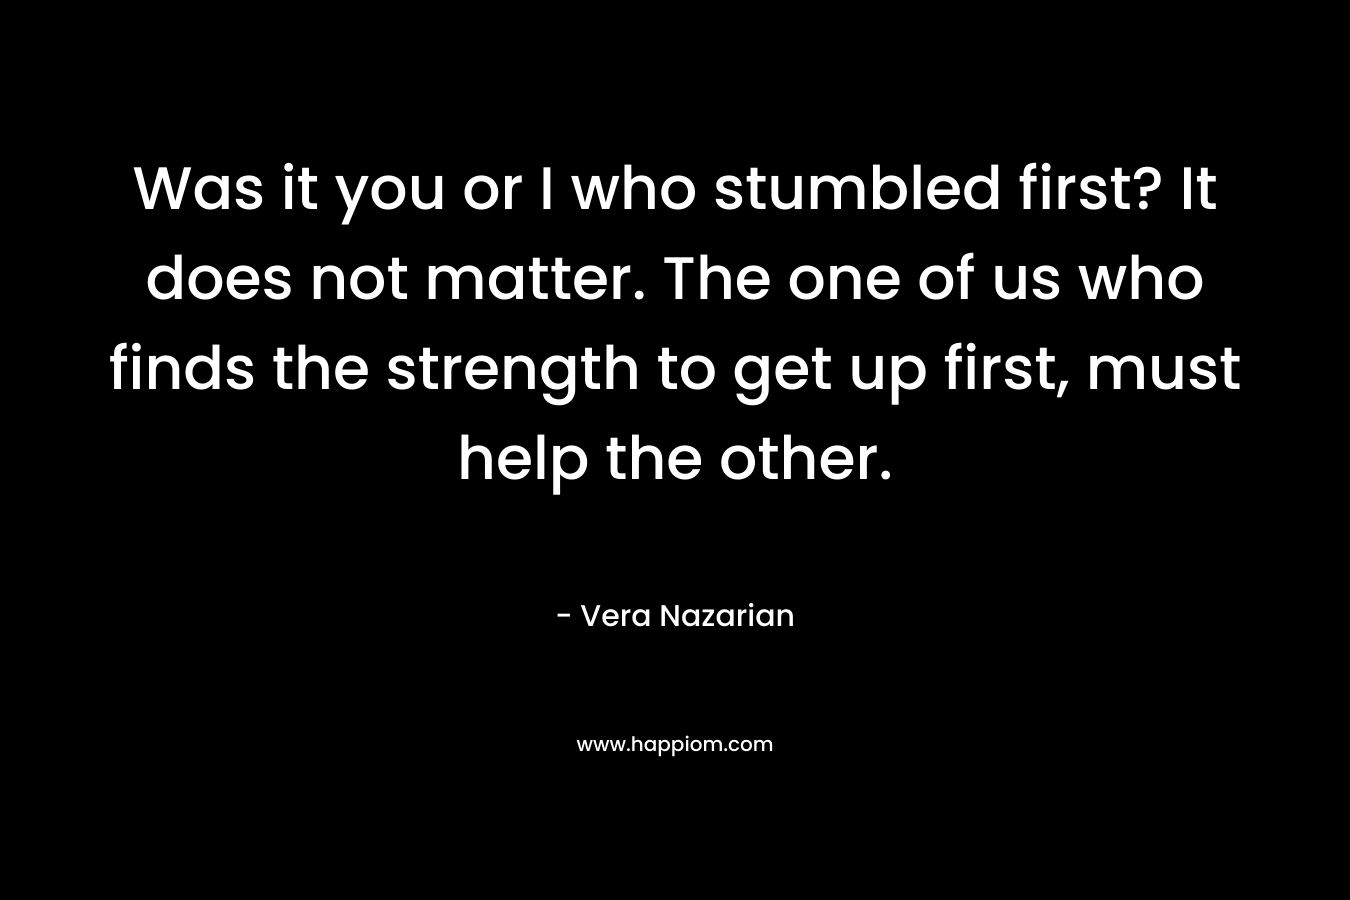 Was it you or I who stumbled first? It does not matter. The one of us who finds the strength to get up first, must help the other. – Vera Nazarian